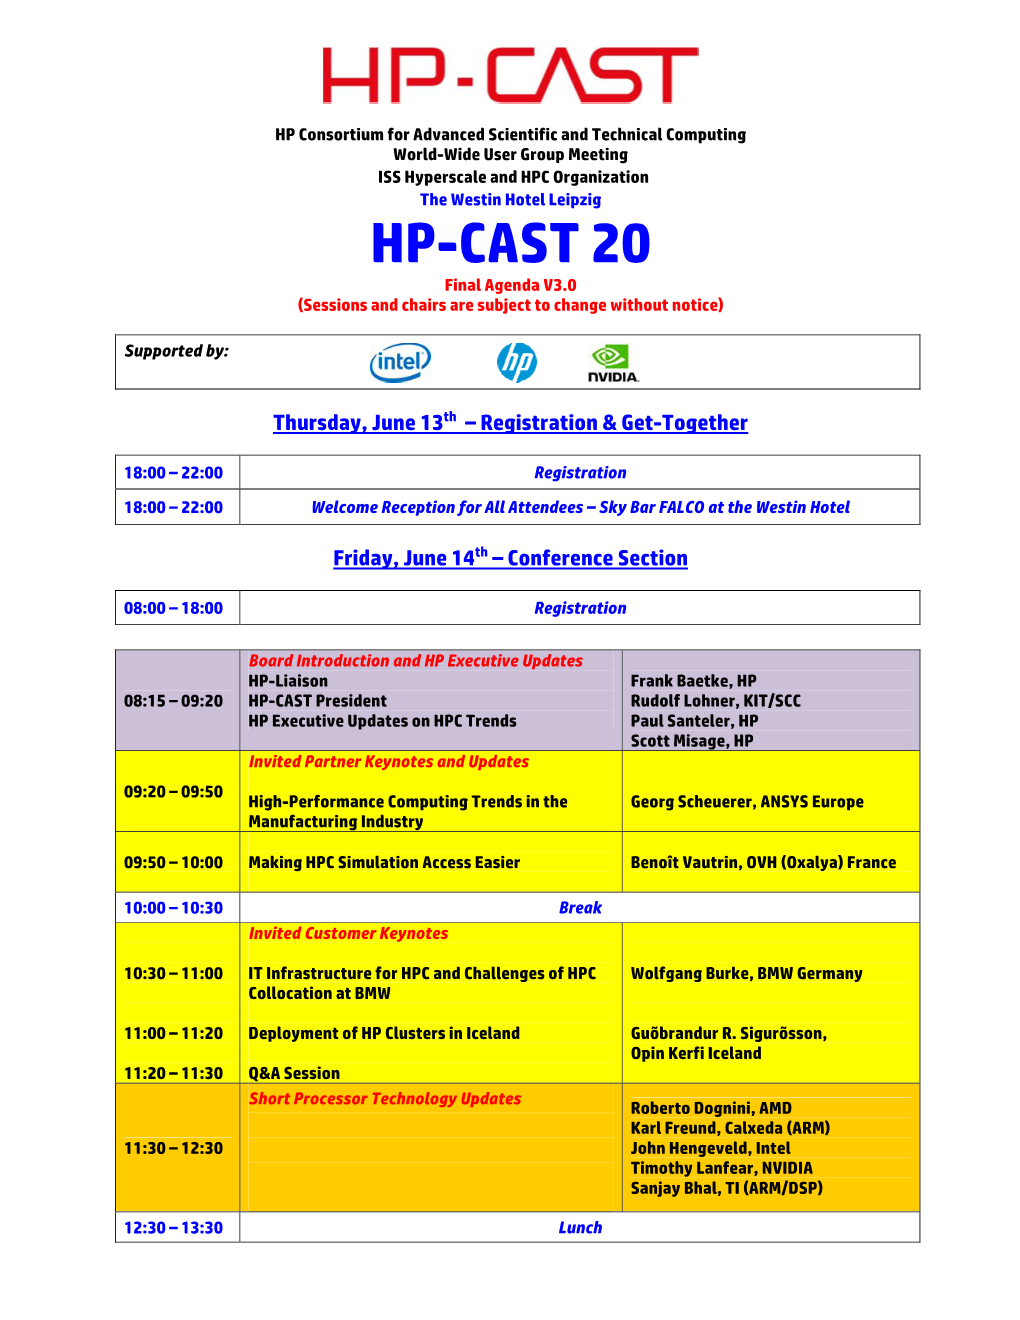 HP-CAST 20 Final Agenda V3.0 (Sessions and Chairs Are Subject to Change Without Notice)